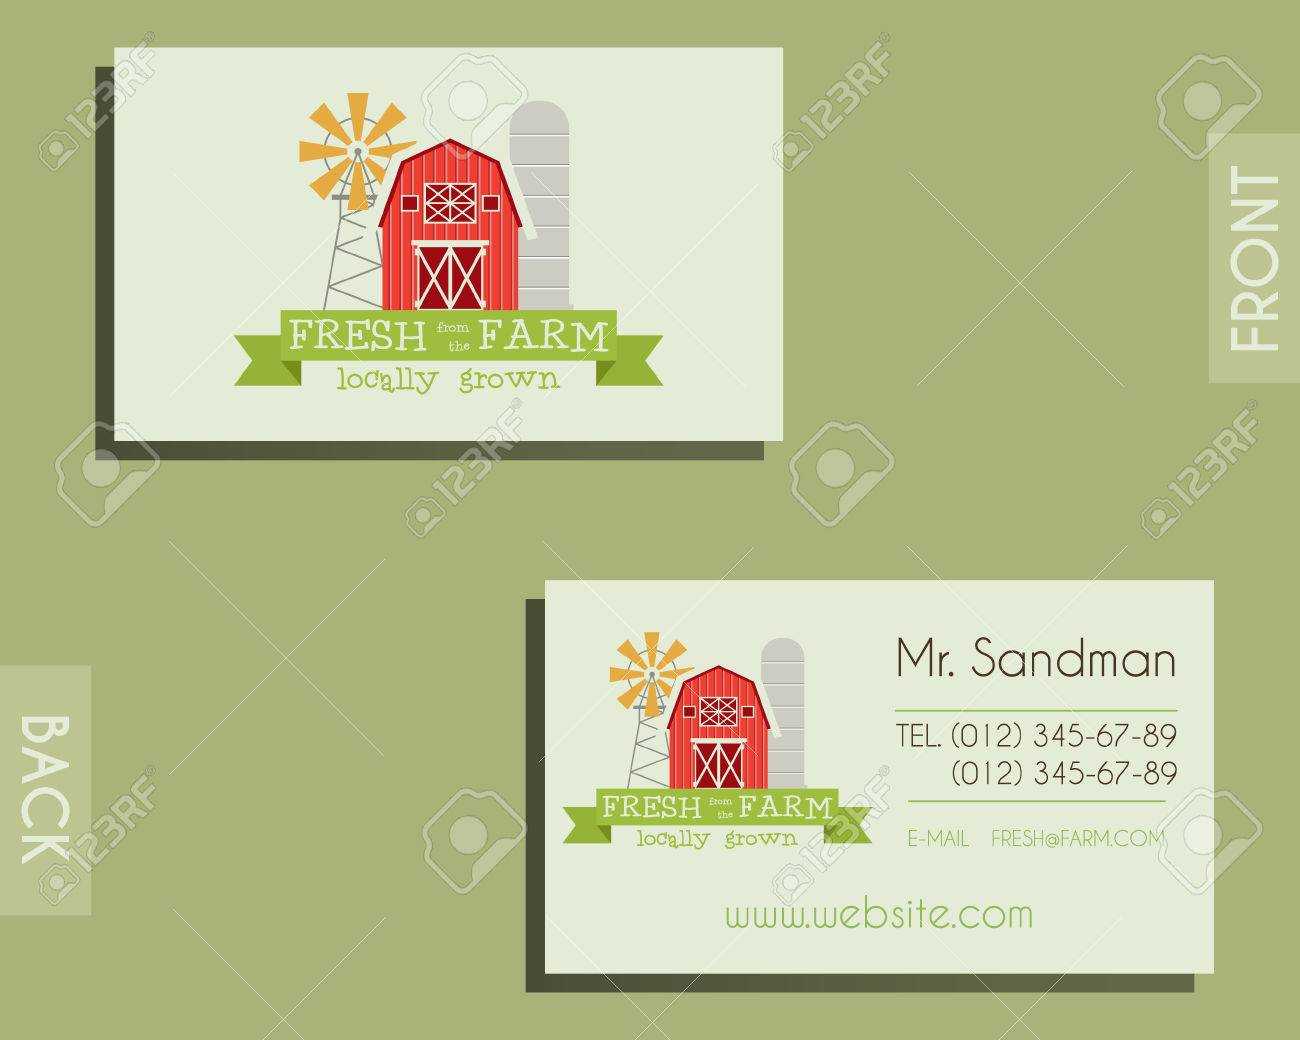 Eco, Organic Visiting Card Template. For Natural Shop, Farm Products And  Other Bio, Organic Business. Ecology Theme. Eco Design. Vector Illustration Inside Bio Card Template